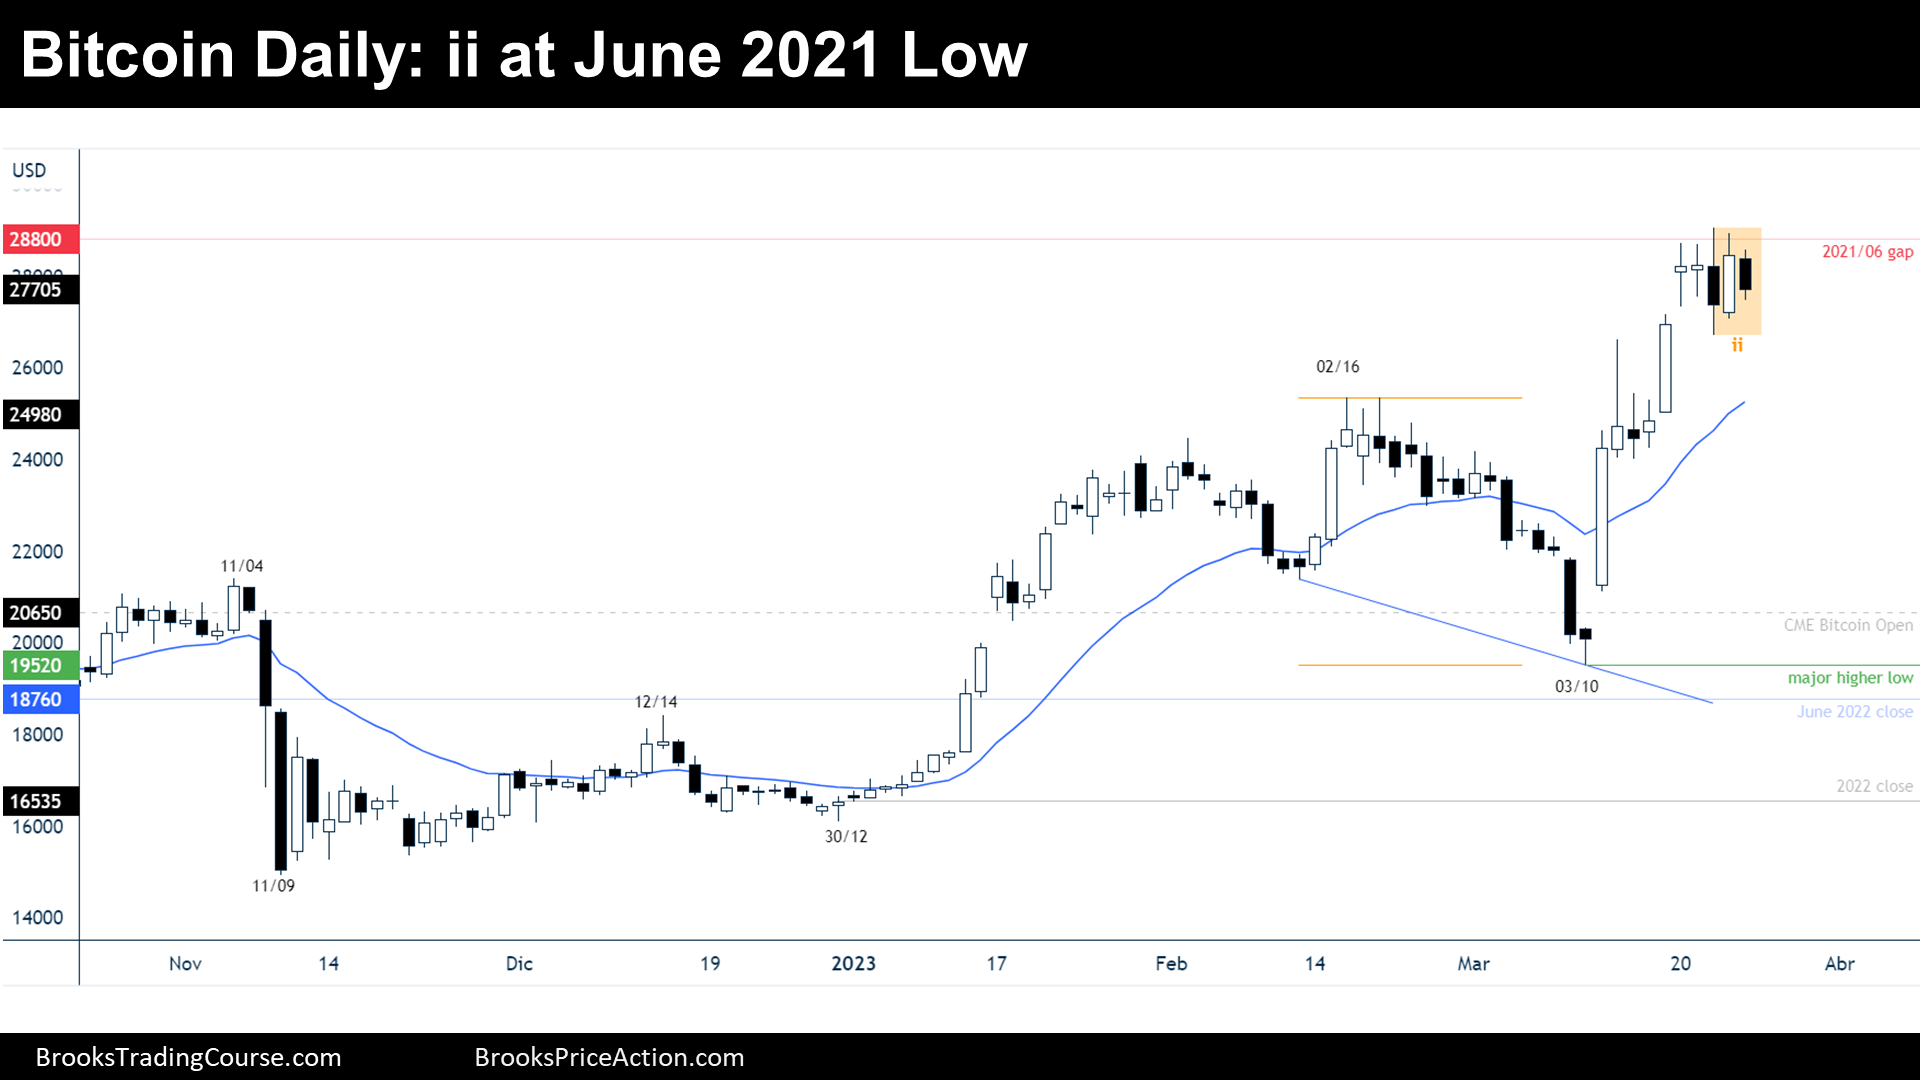 Bitcoin daily chart ii at June 2021 low